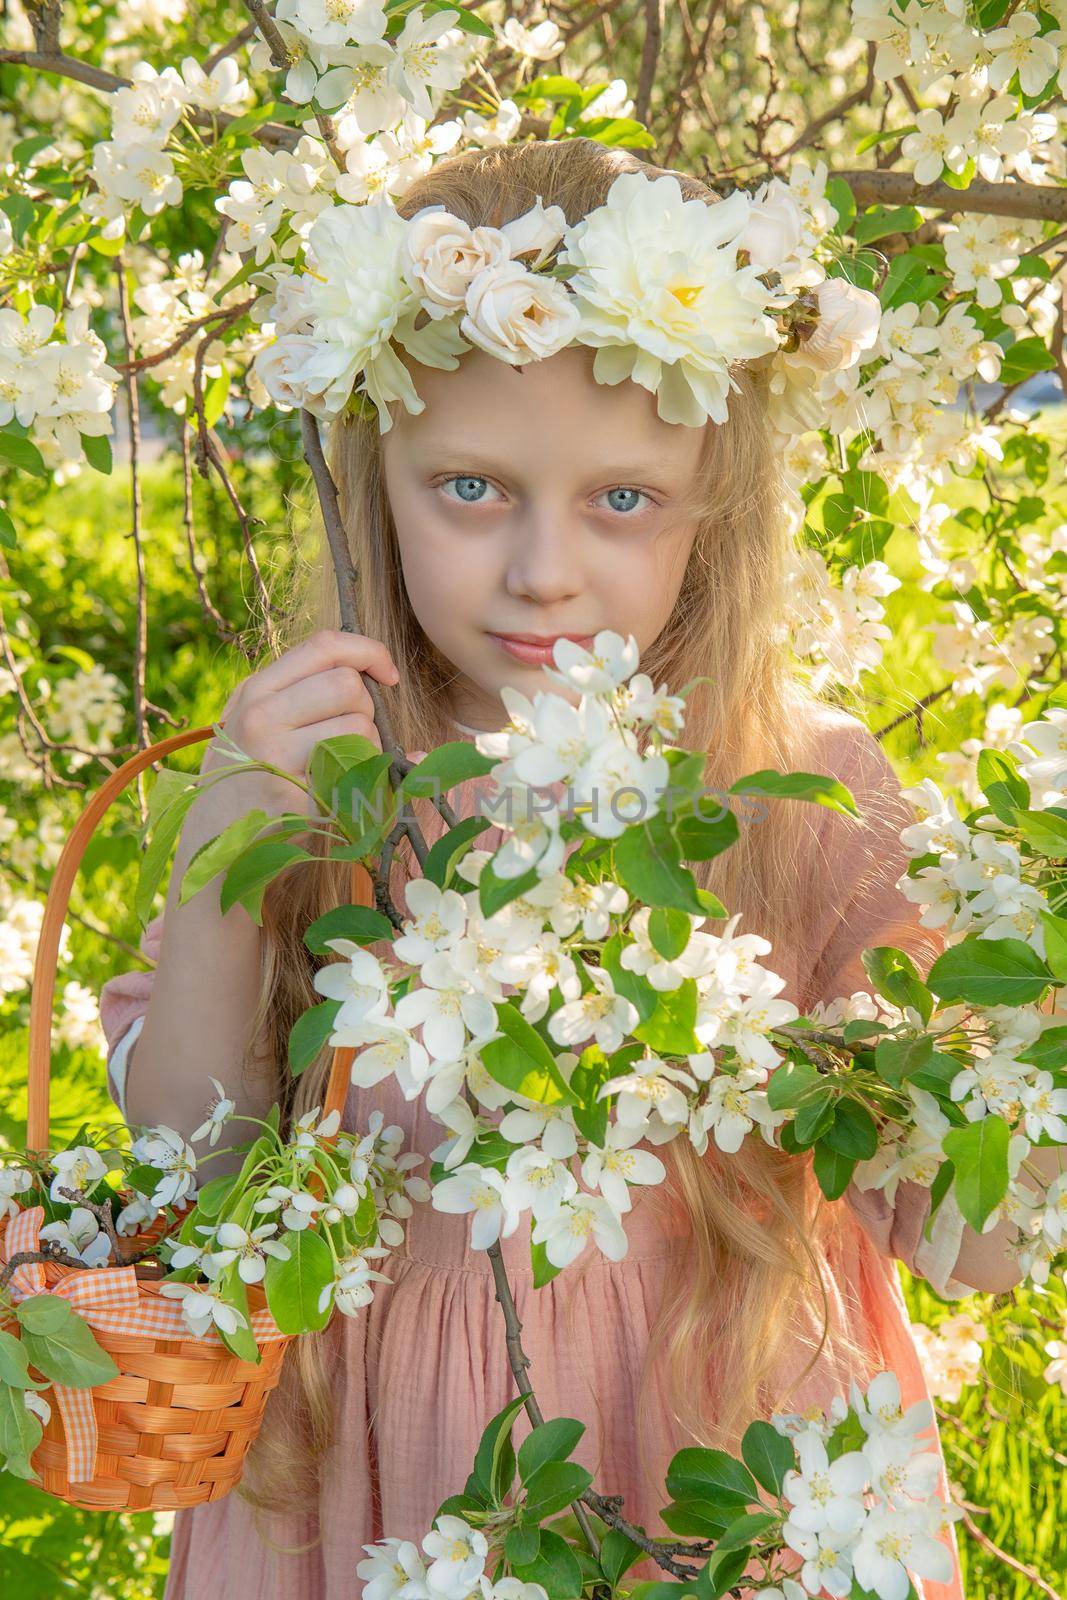 A girl sniffs a beautiful white apple tree, spring in the midst of the flowering of the apple tree is beautiful garden in hair, park people nature beauty tree, model blossom. blooming cute woman meadow makeup fresh by 89167702191